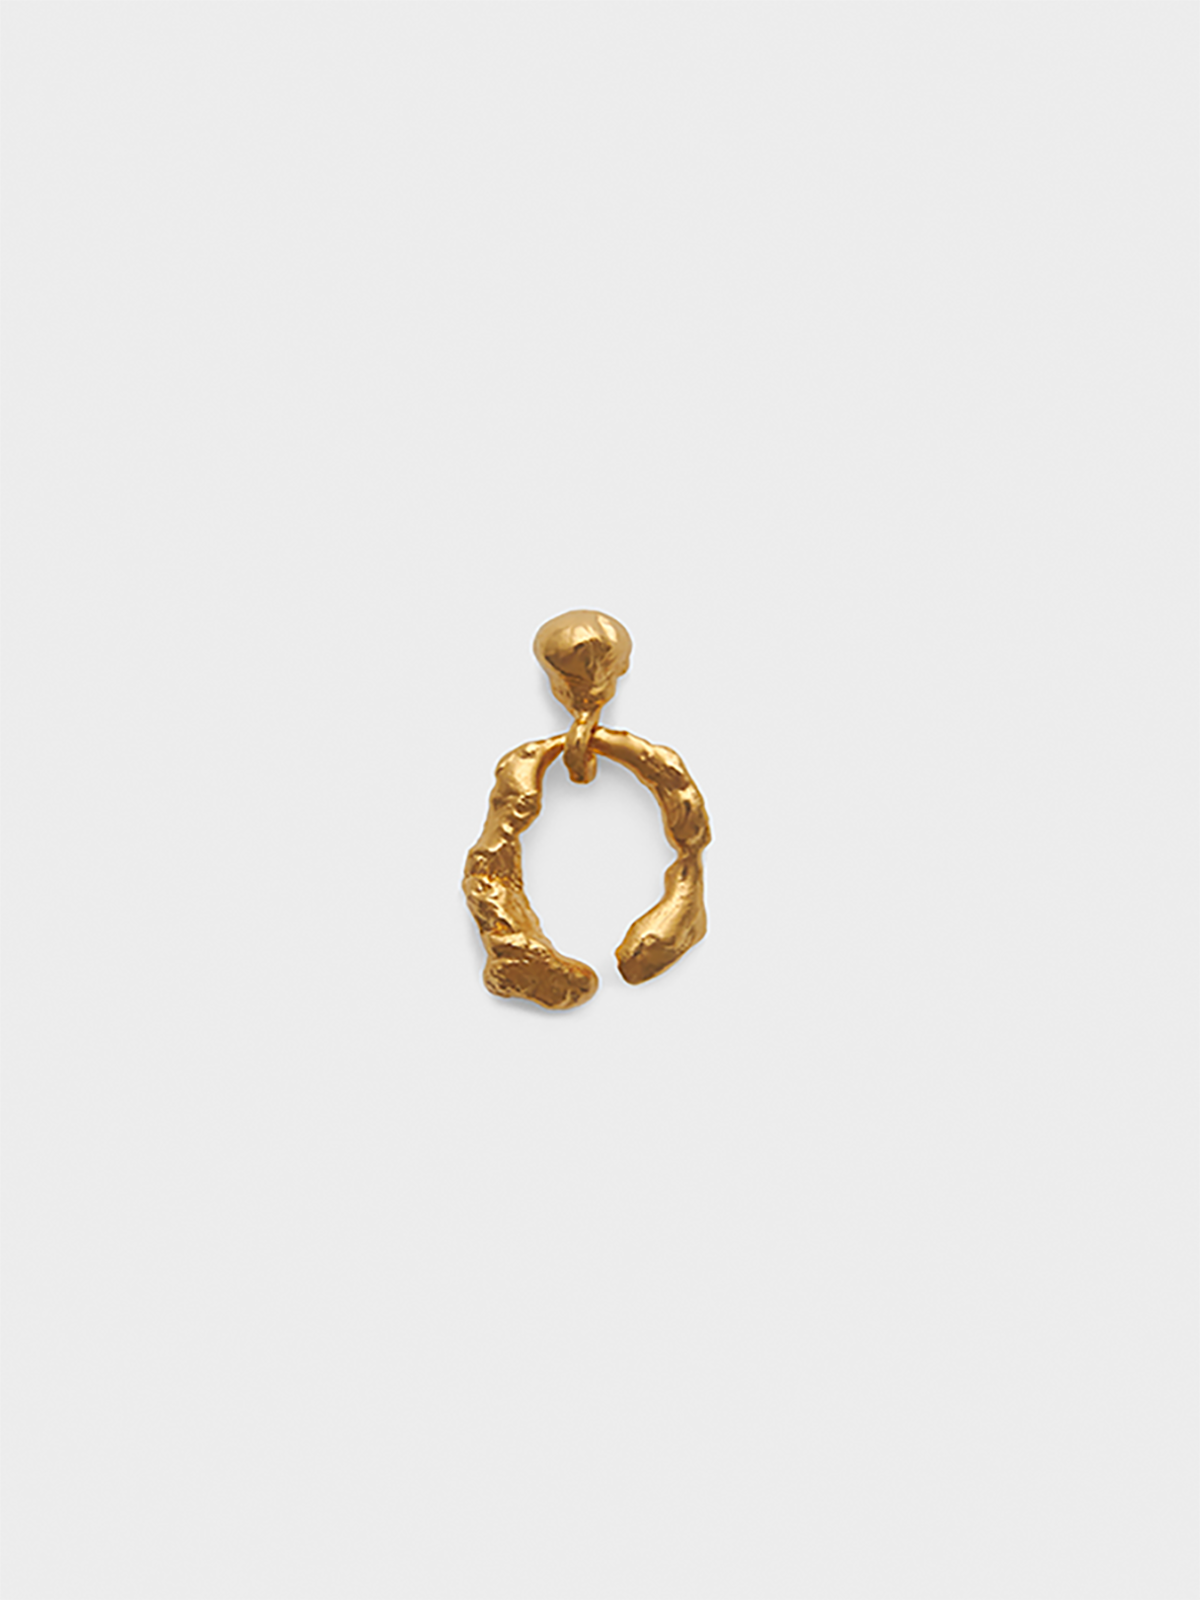 Lea Hoyer - Coral Earring with Gold Plating